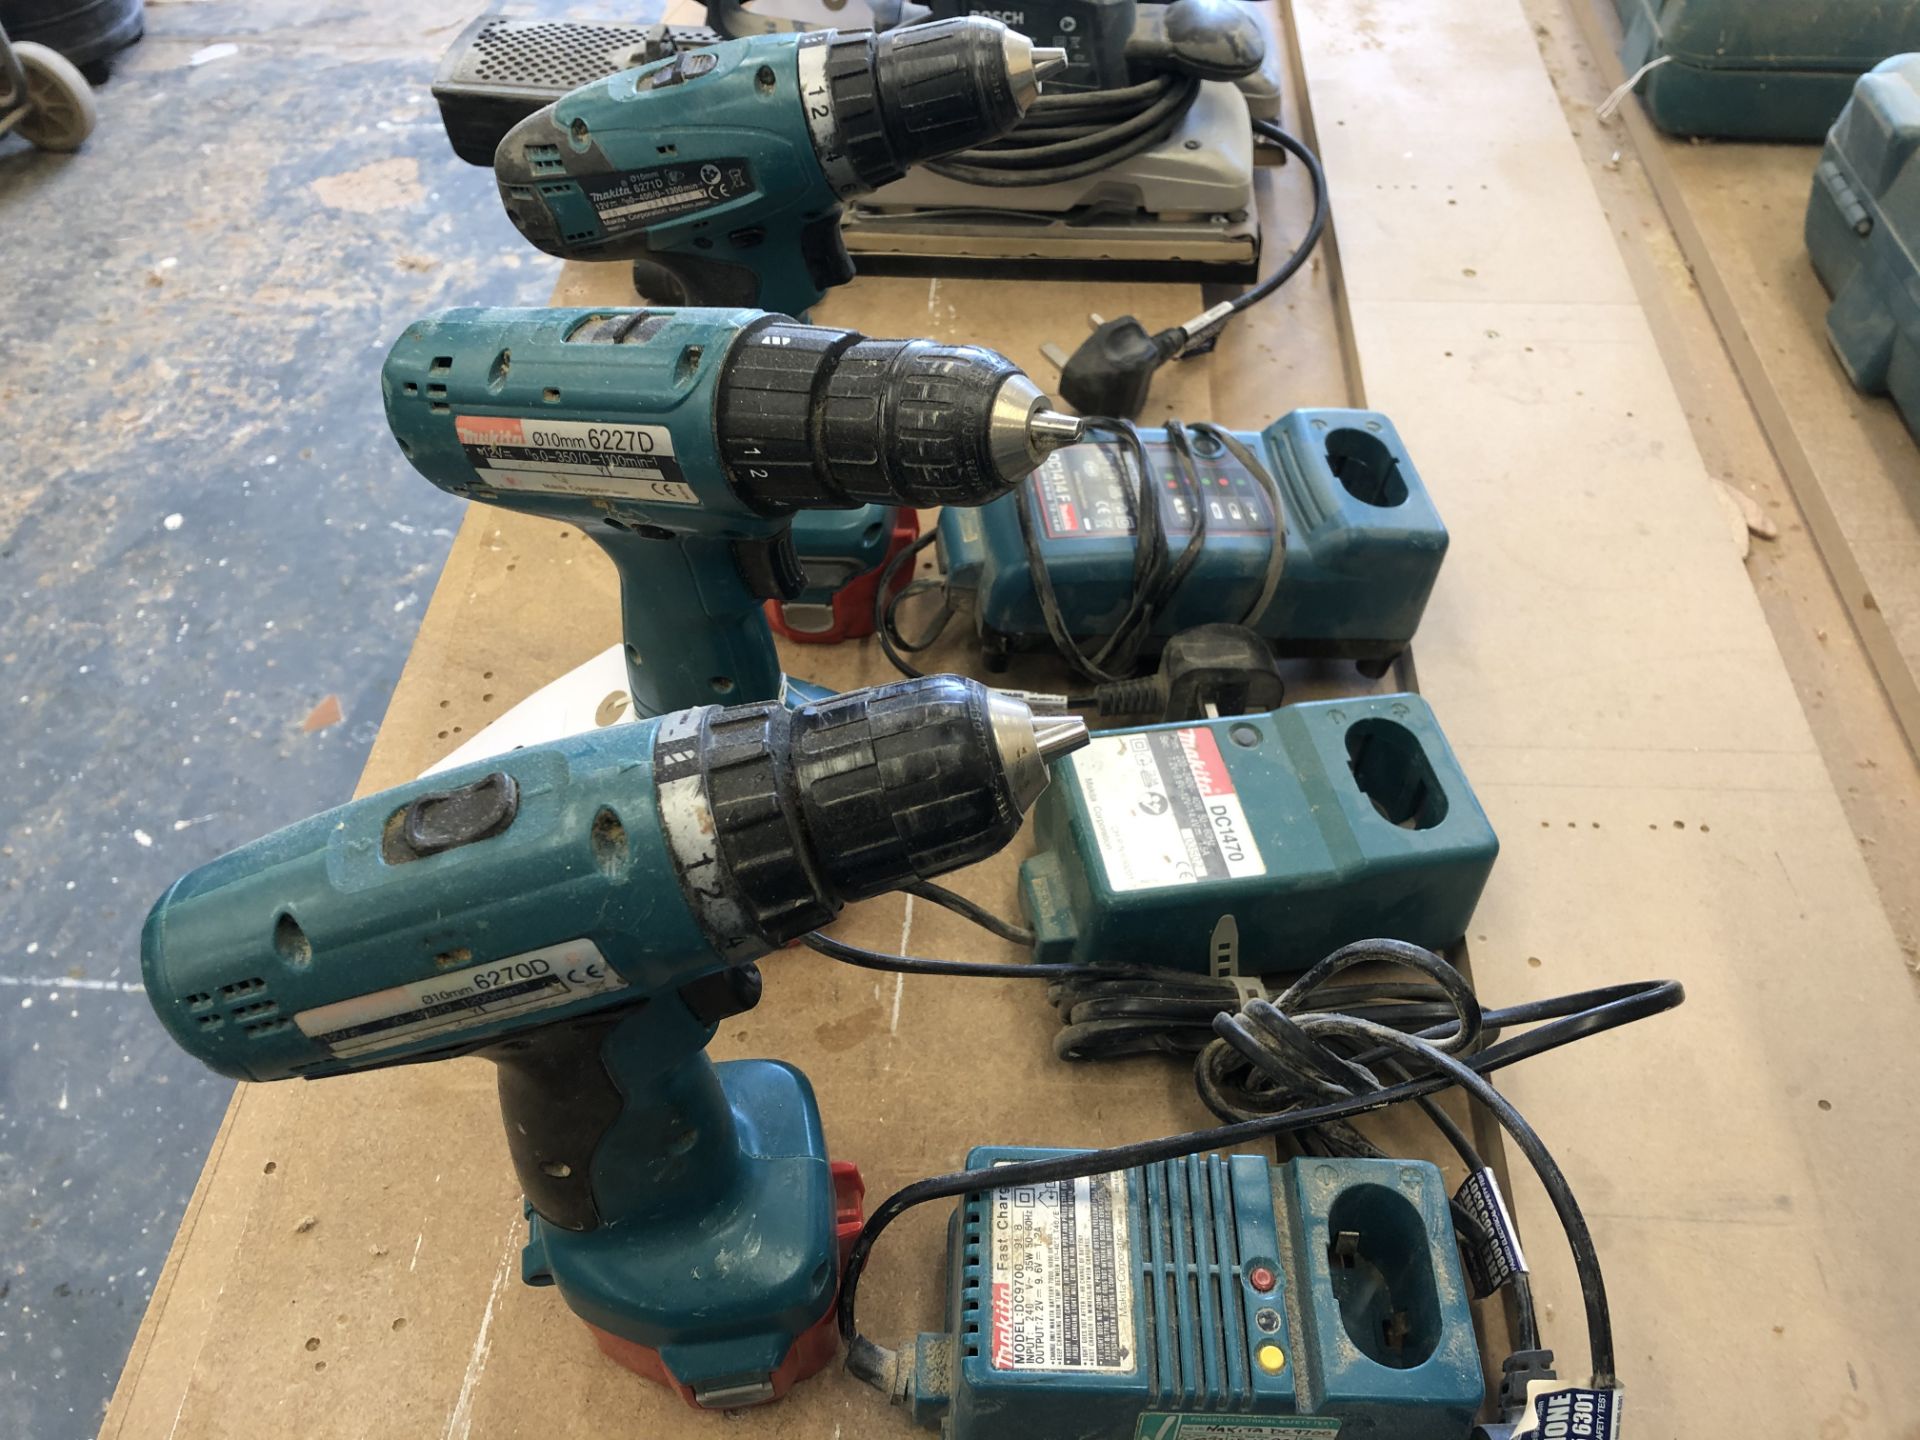 (3) Makita Cordless Drills with (3) Battery Chargers